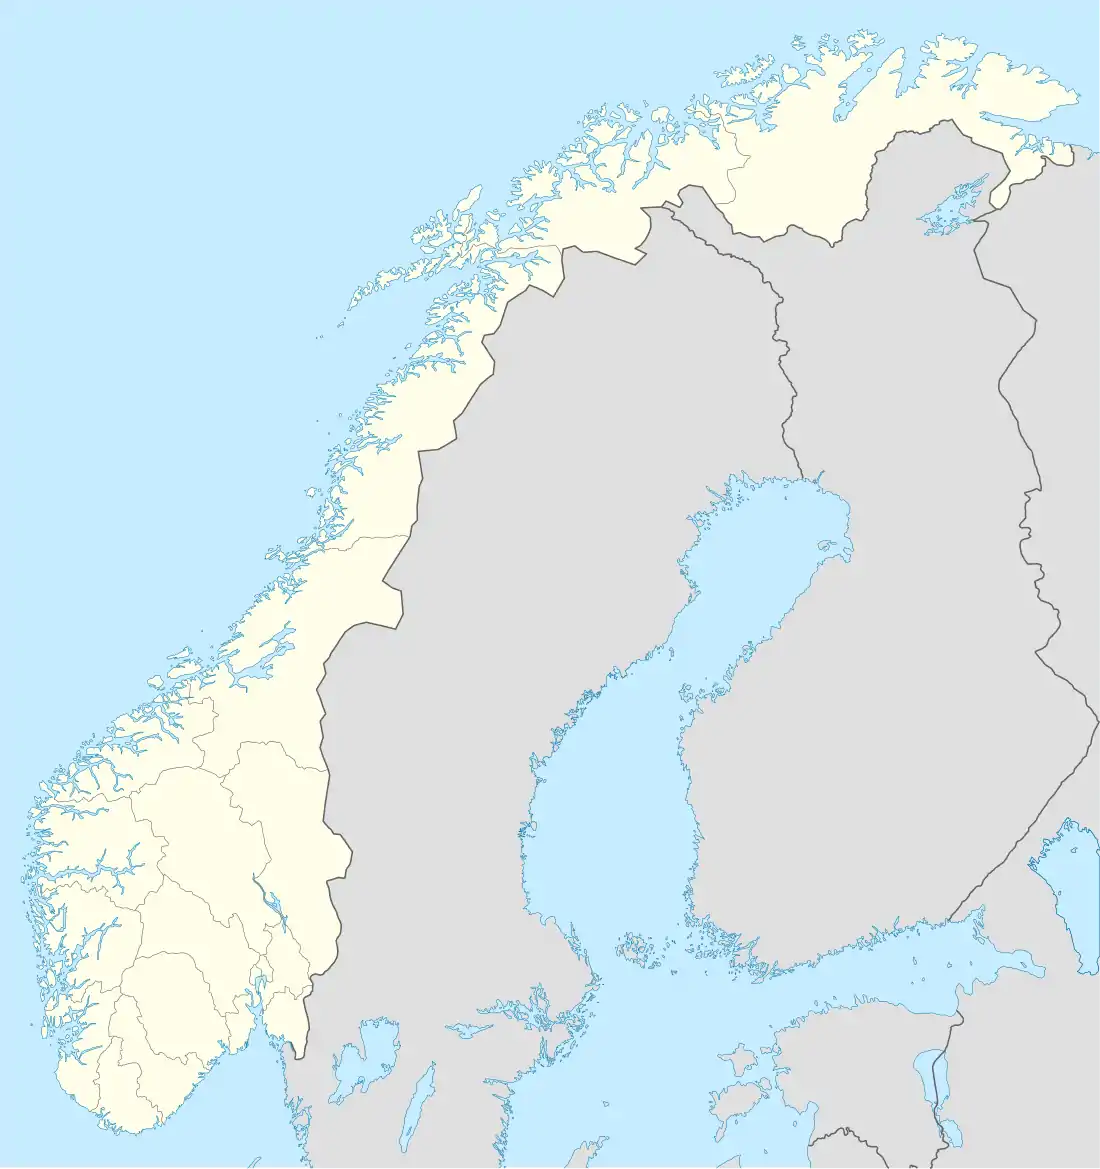 Leira is located in Norway